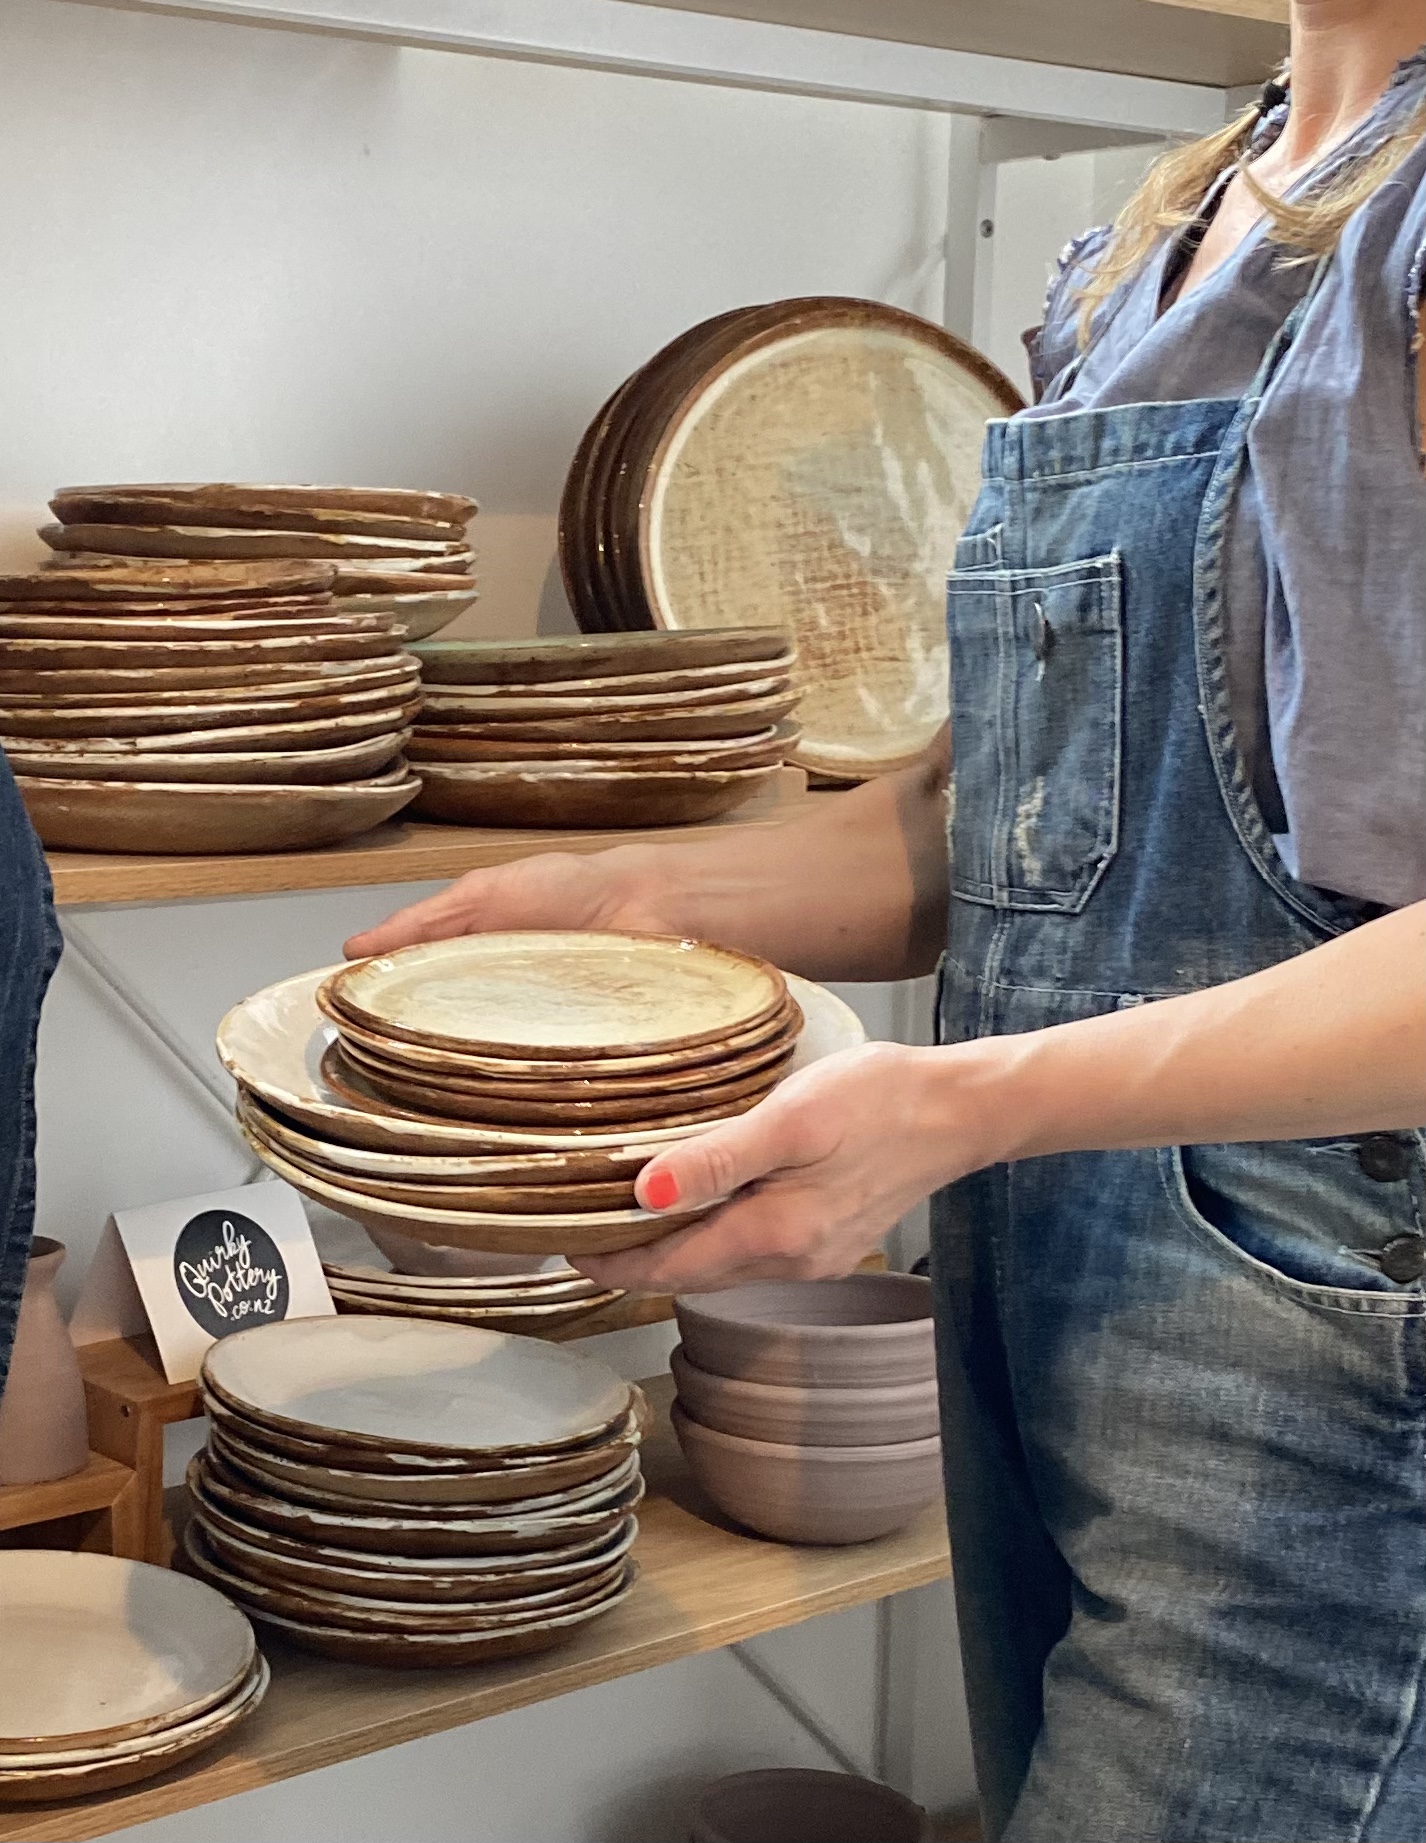 A stack of handmade plates